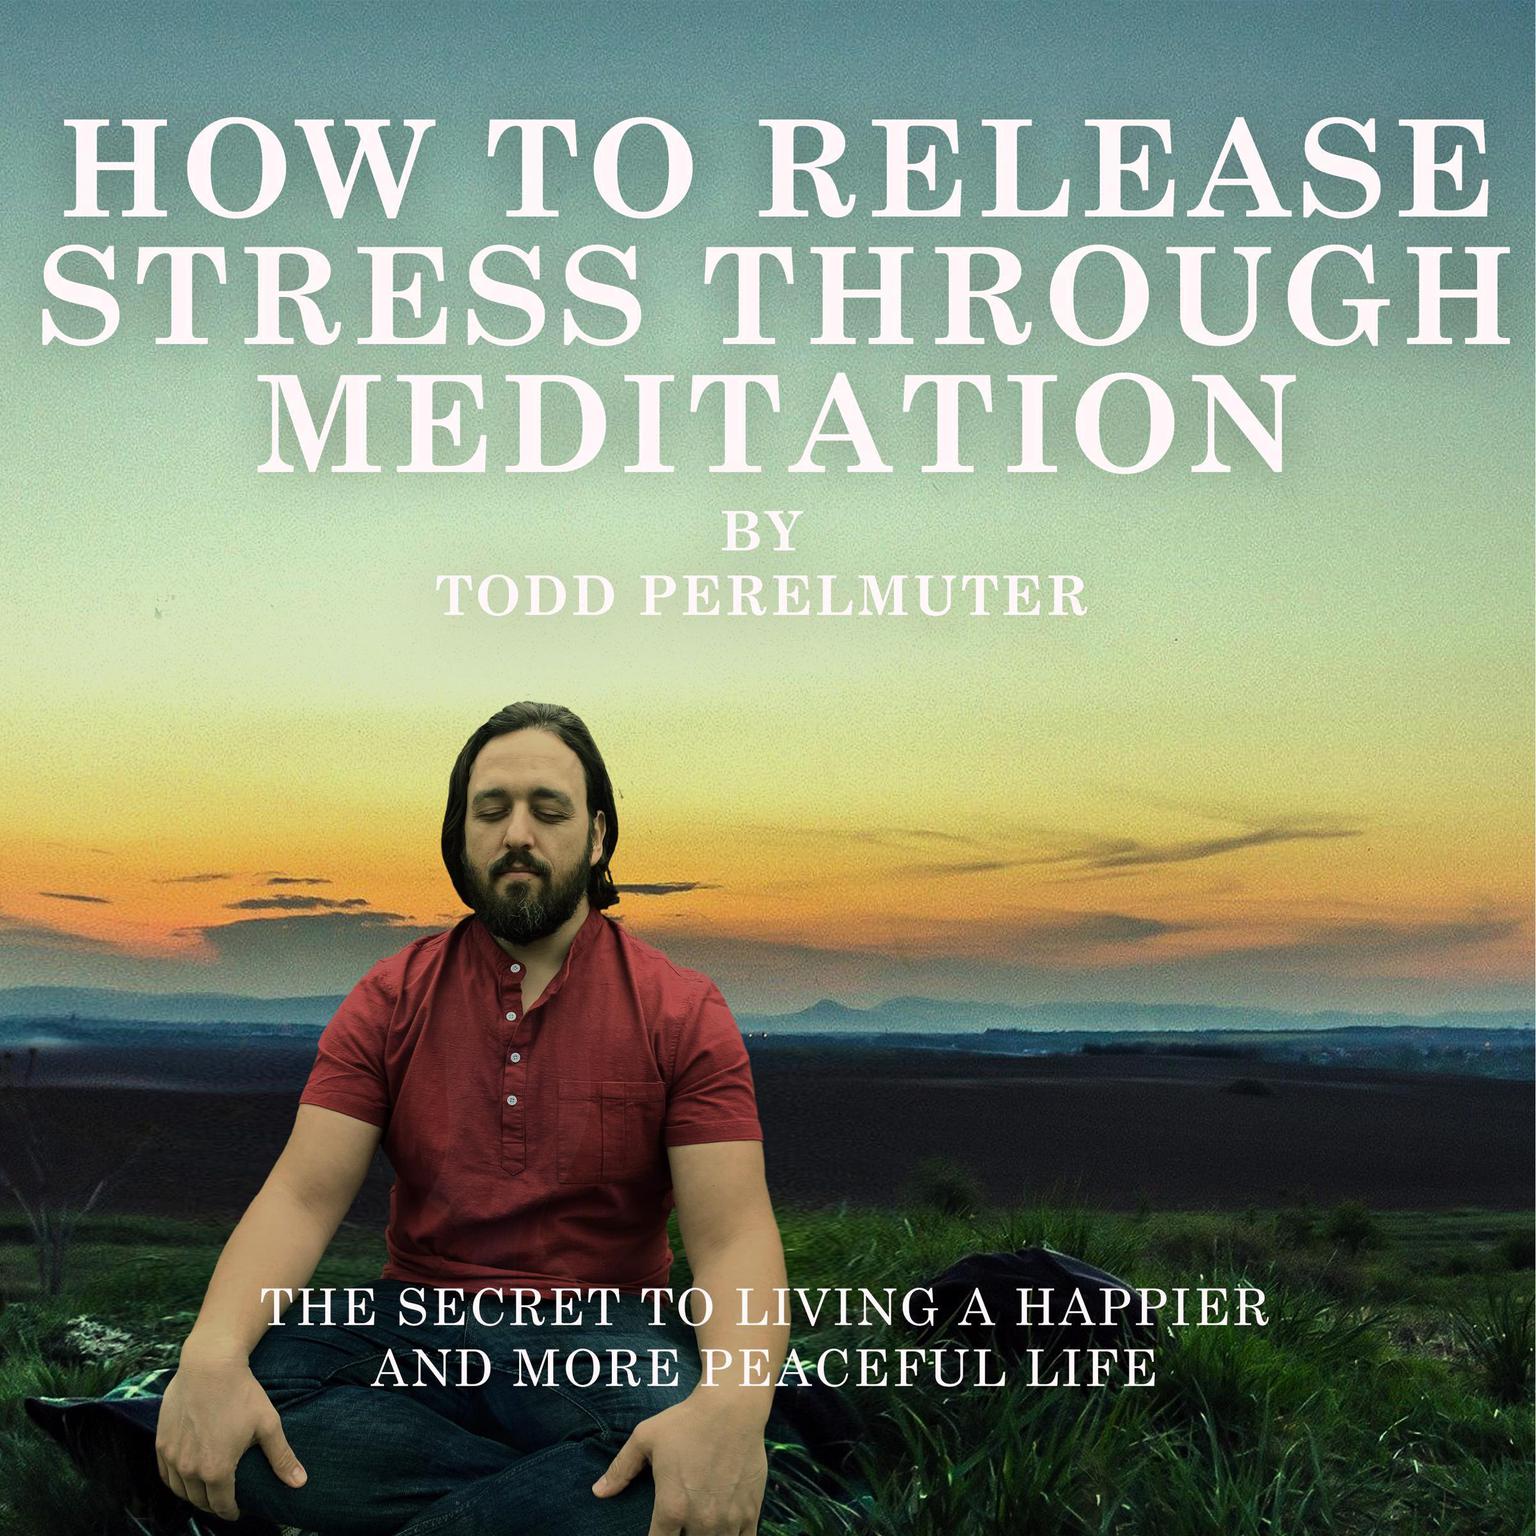 How To Release Stress Through Meditation: The Secret to Living a Happier and More Peaceful Life Audiobook, by Todd Perelmuter